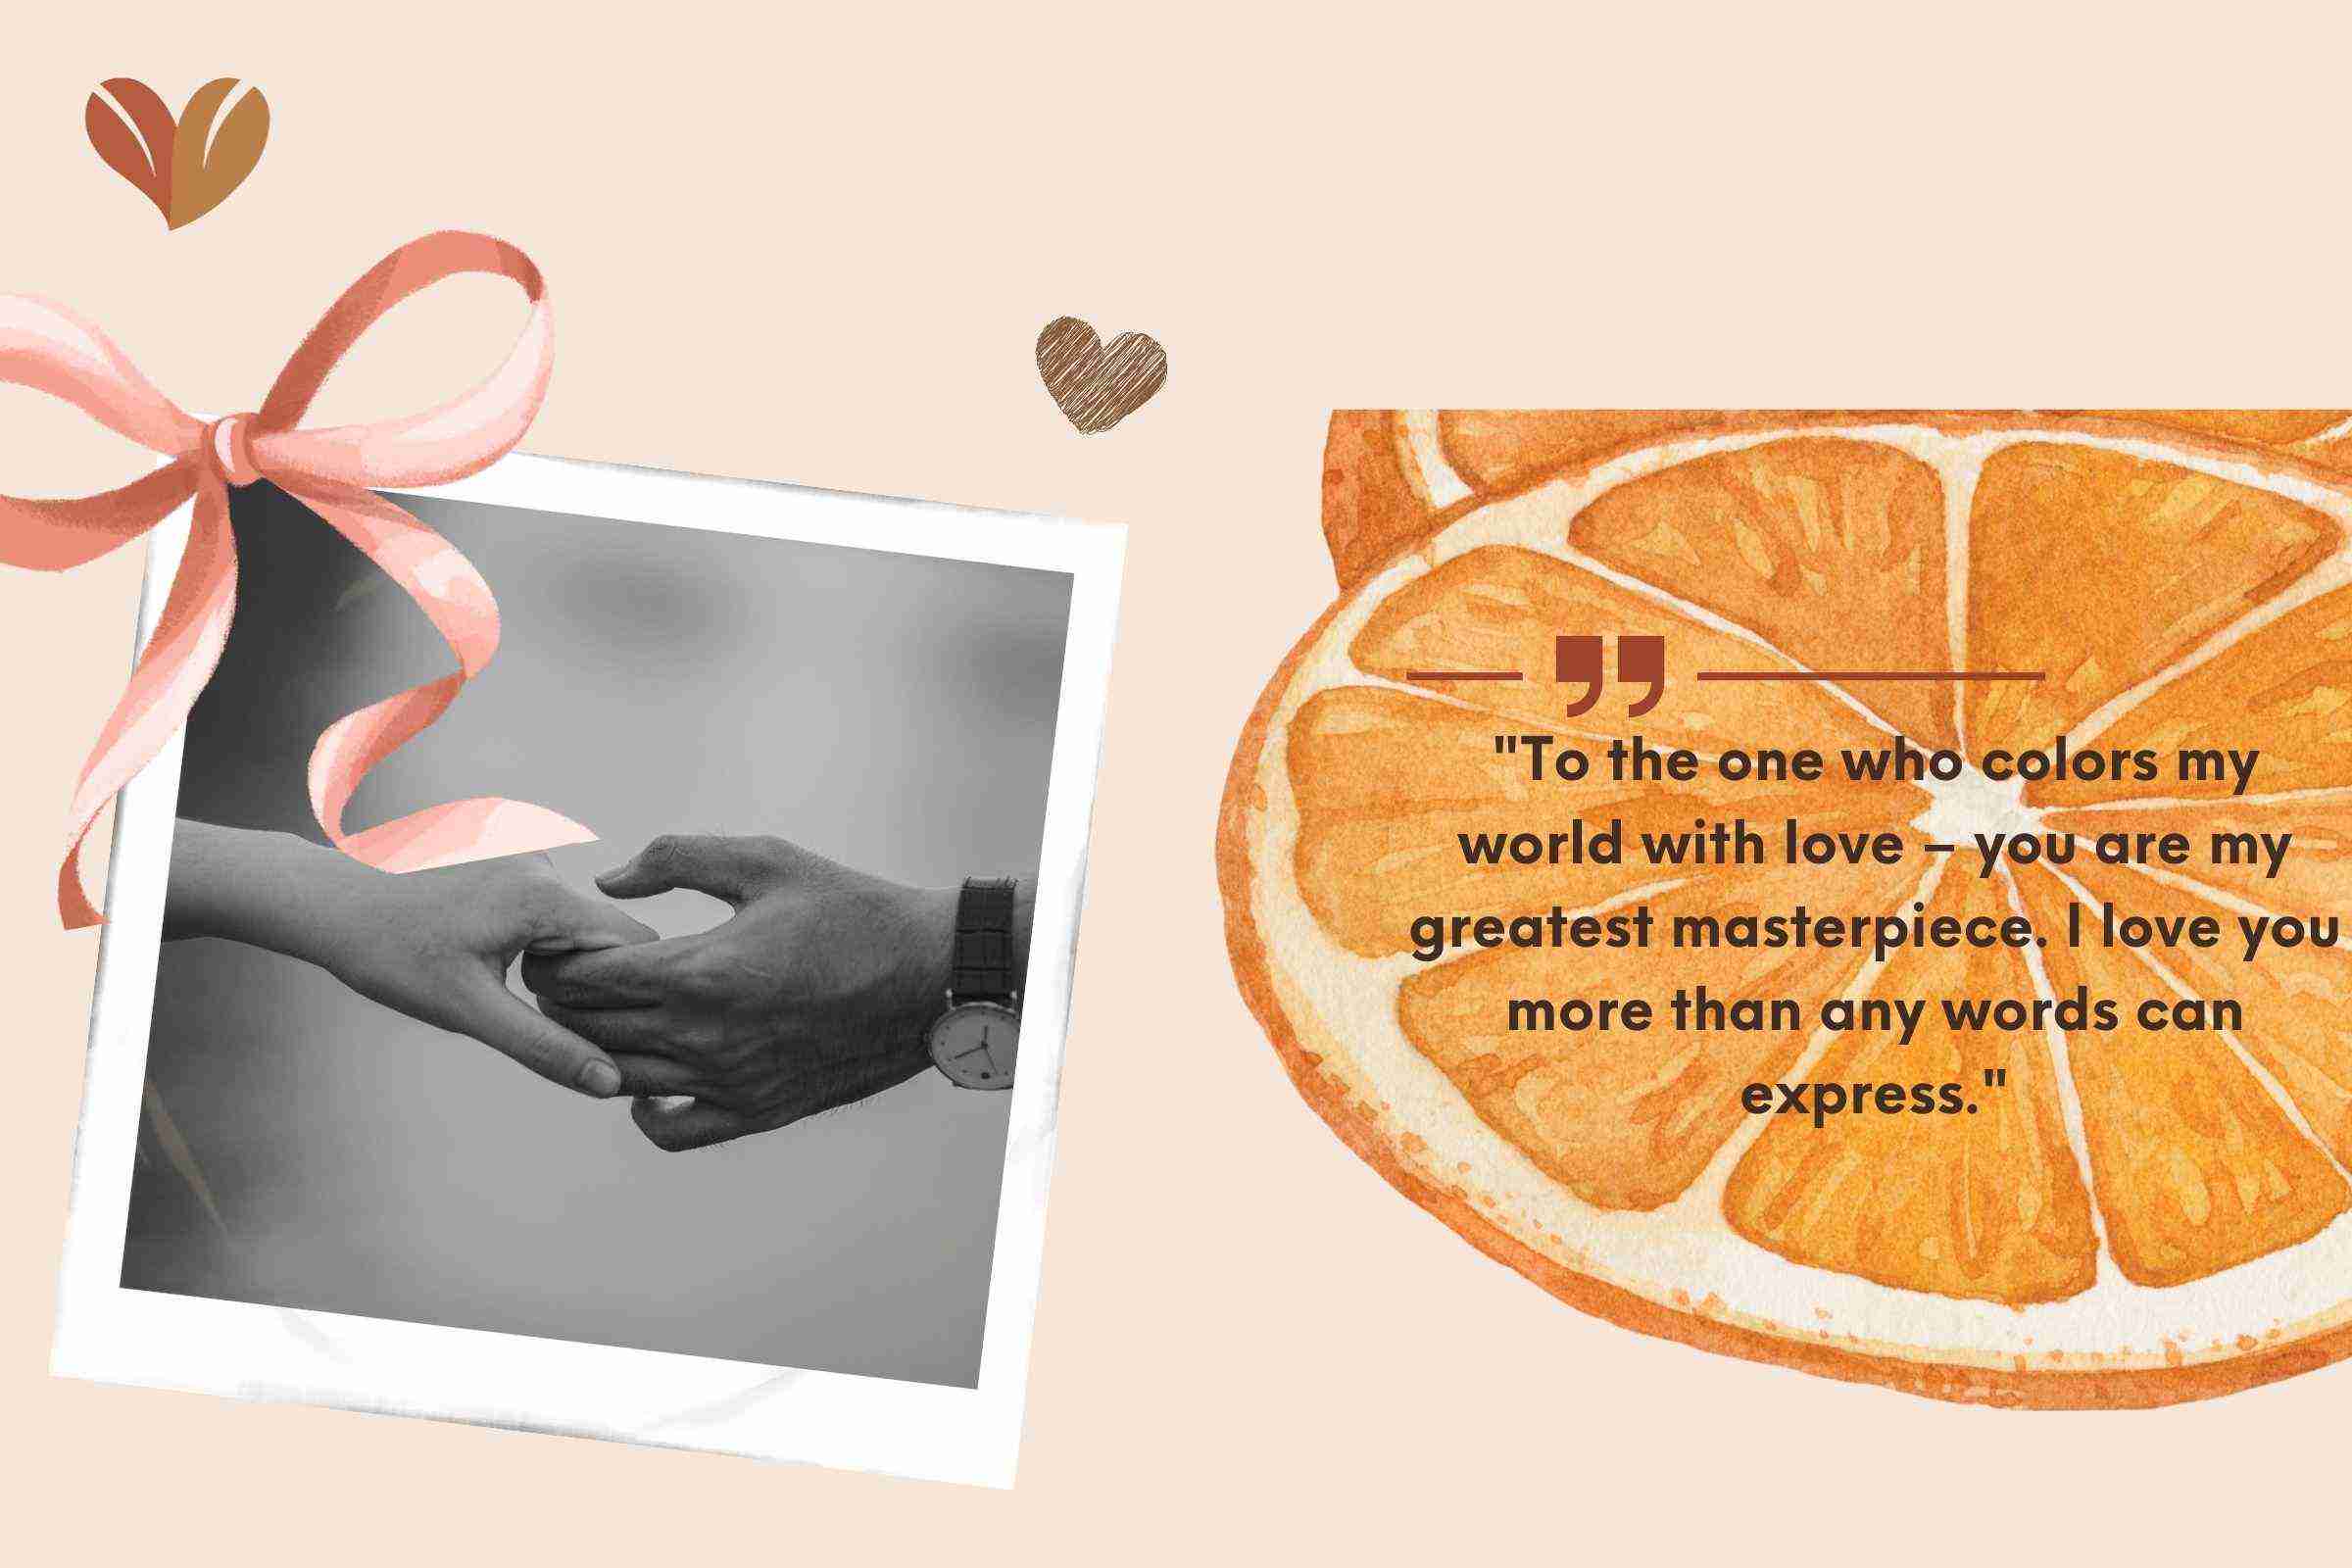 Turning moments into memories with thoughtful words. Share the joy with fiance card messages.